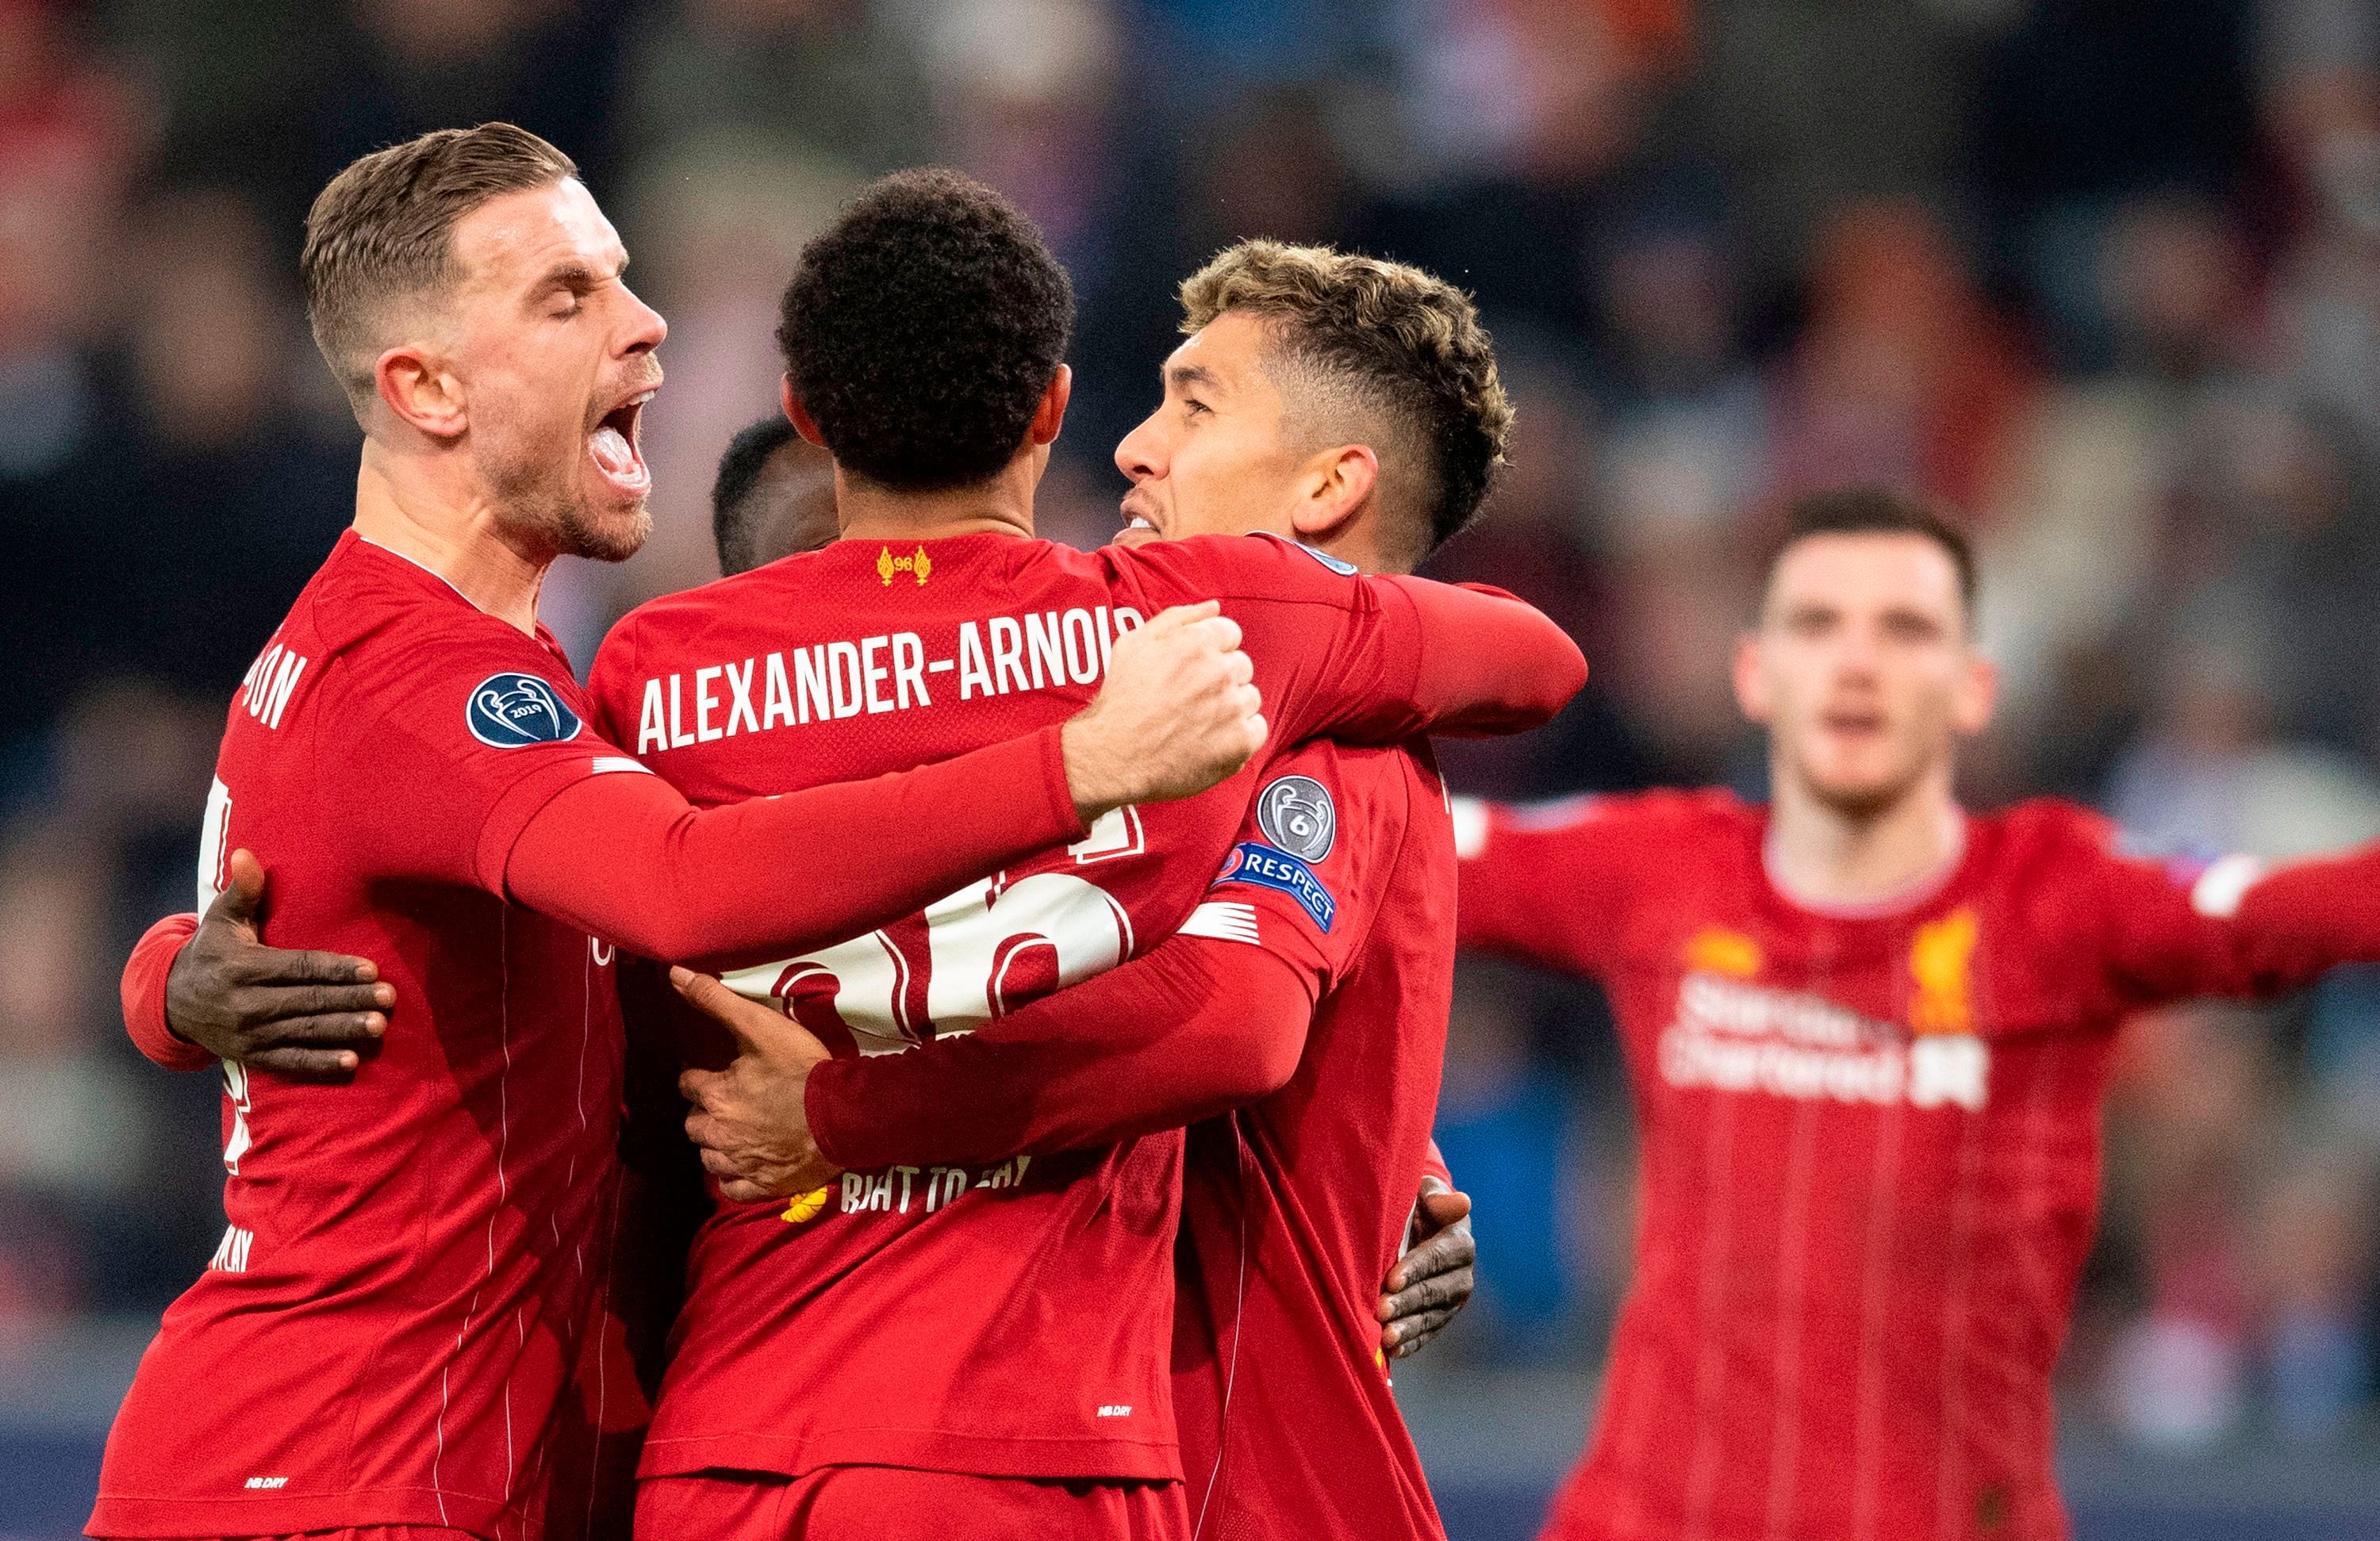 Liverpool's team celebrates scoring during the UEFA Champions League Group E football match between RB Salzburg and Liverpool FC. (AFP Photo)